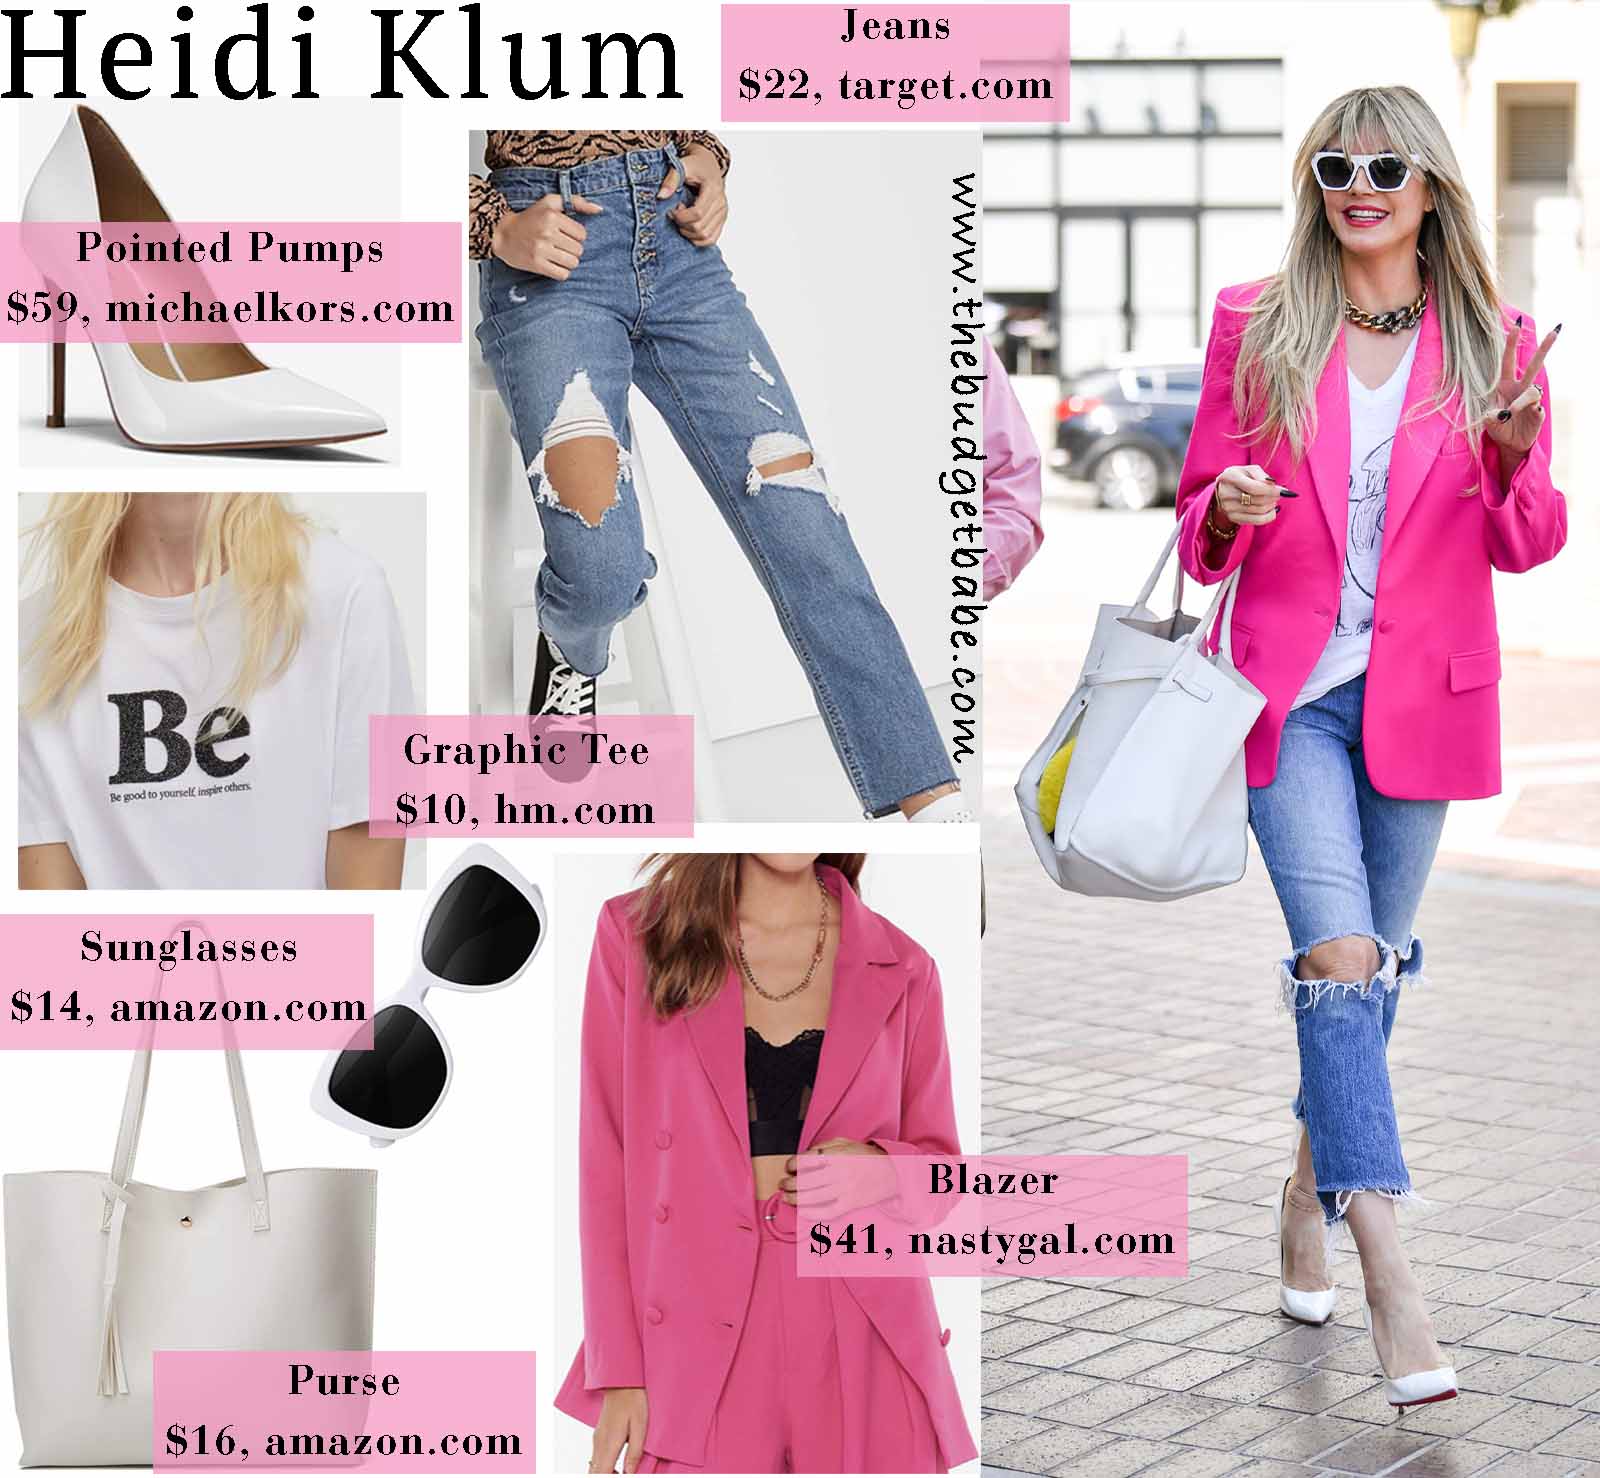 Heidi's street style stands out!